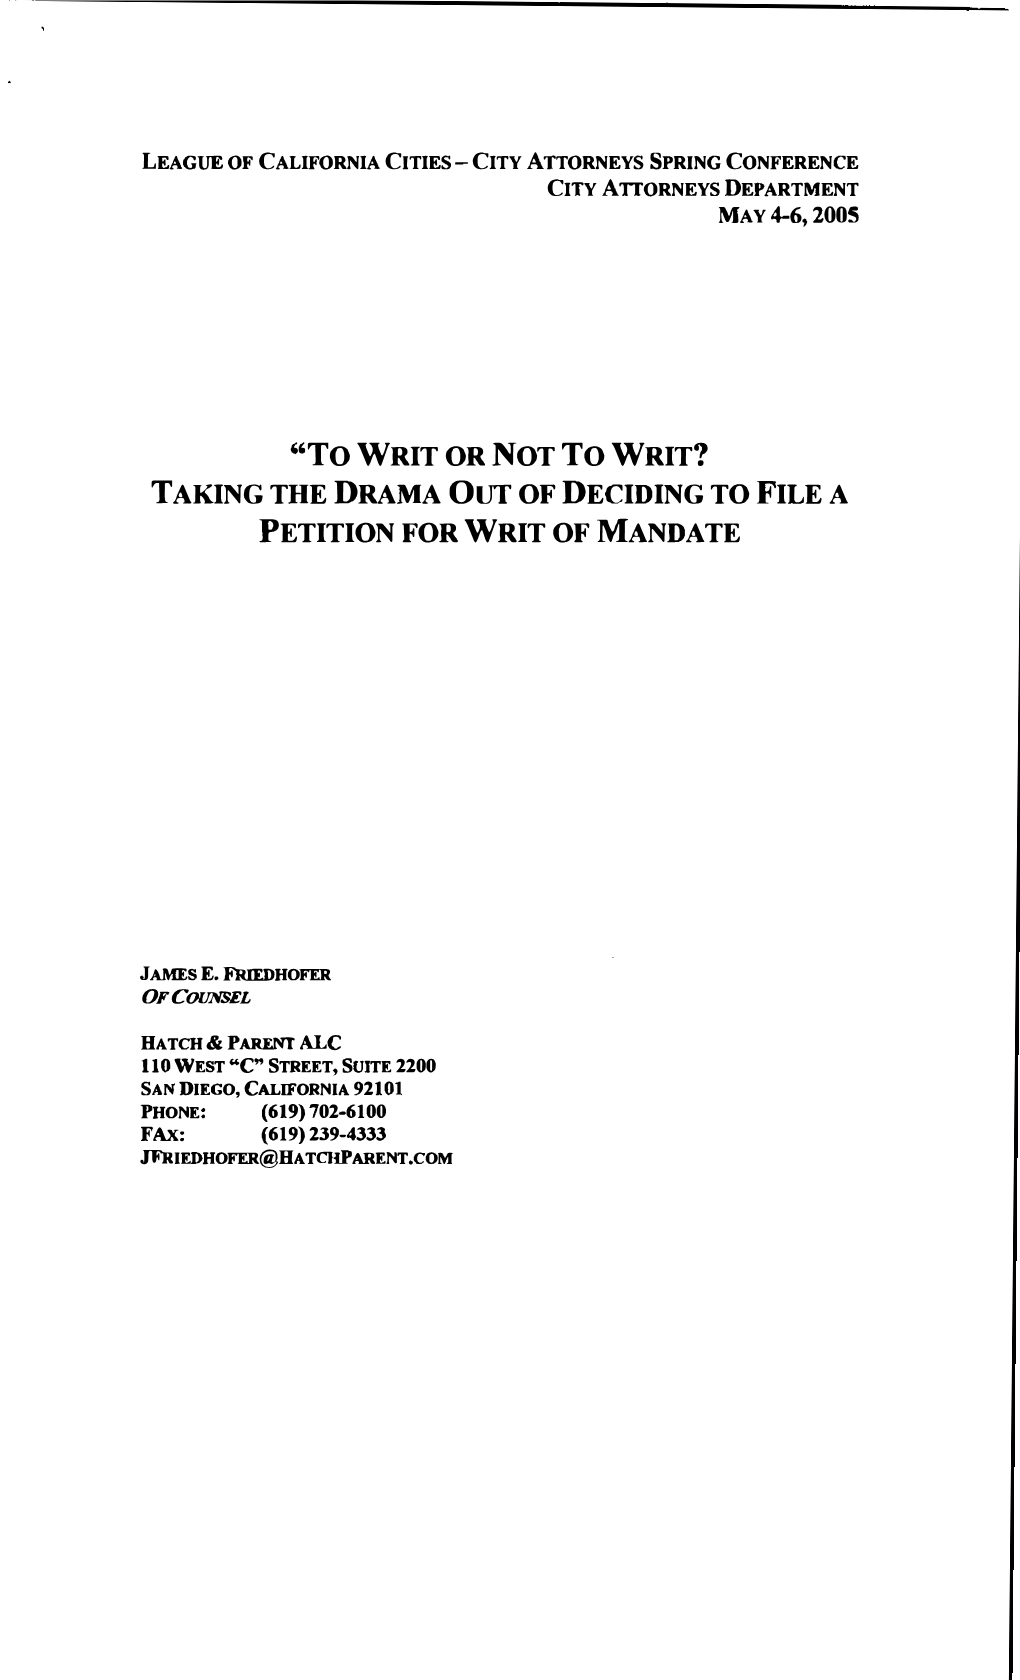 To Writ Or Not to Writ? Taking the Drama out of Deciding to File a Petition for Writ of Mandate